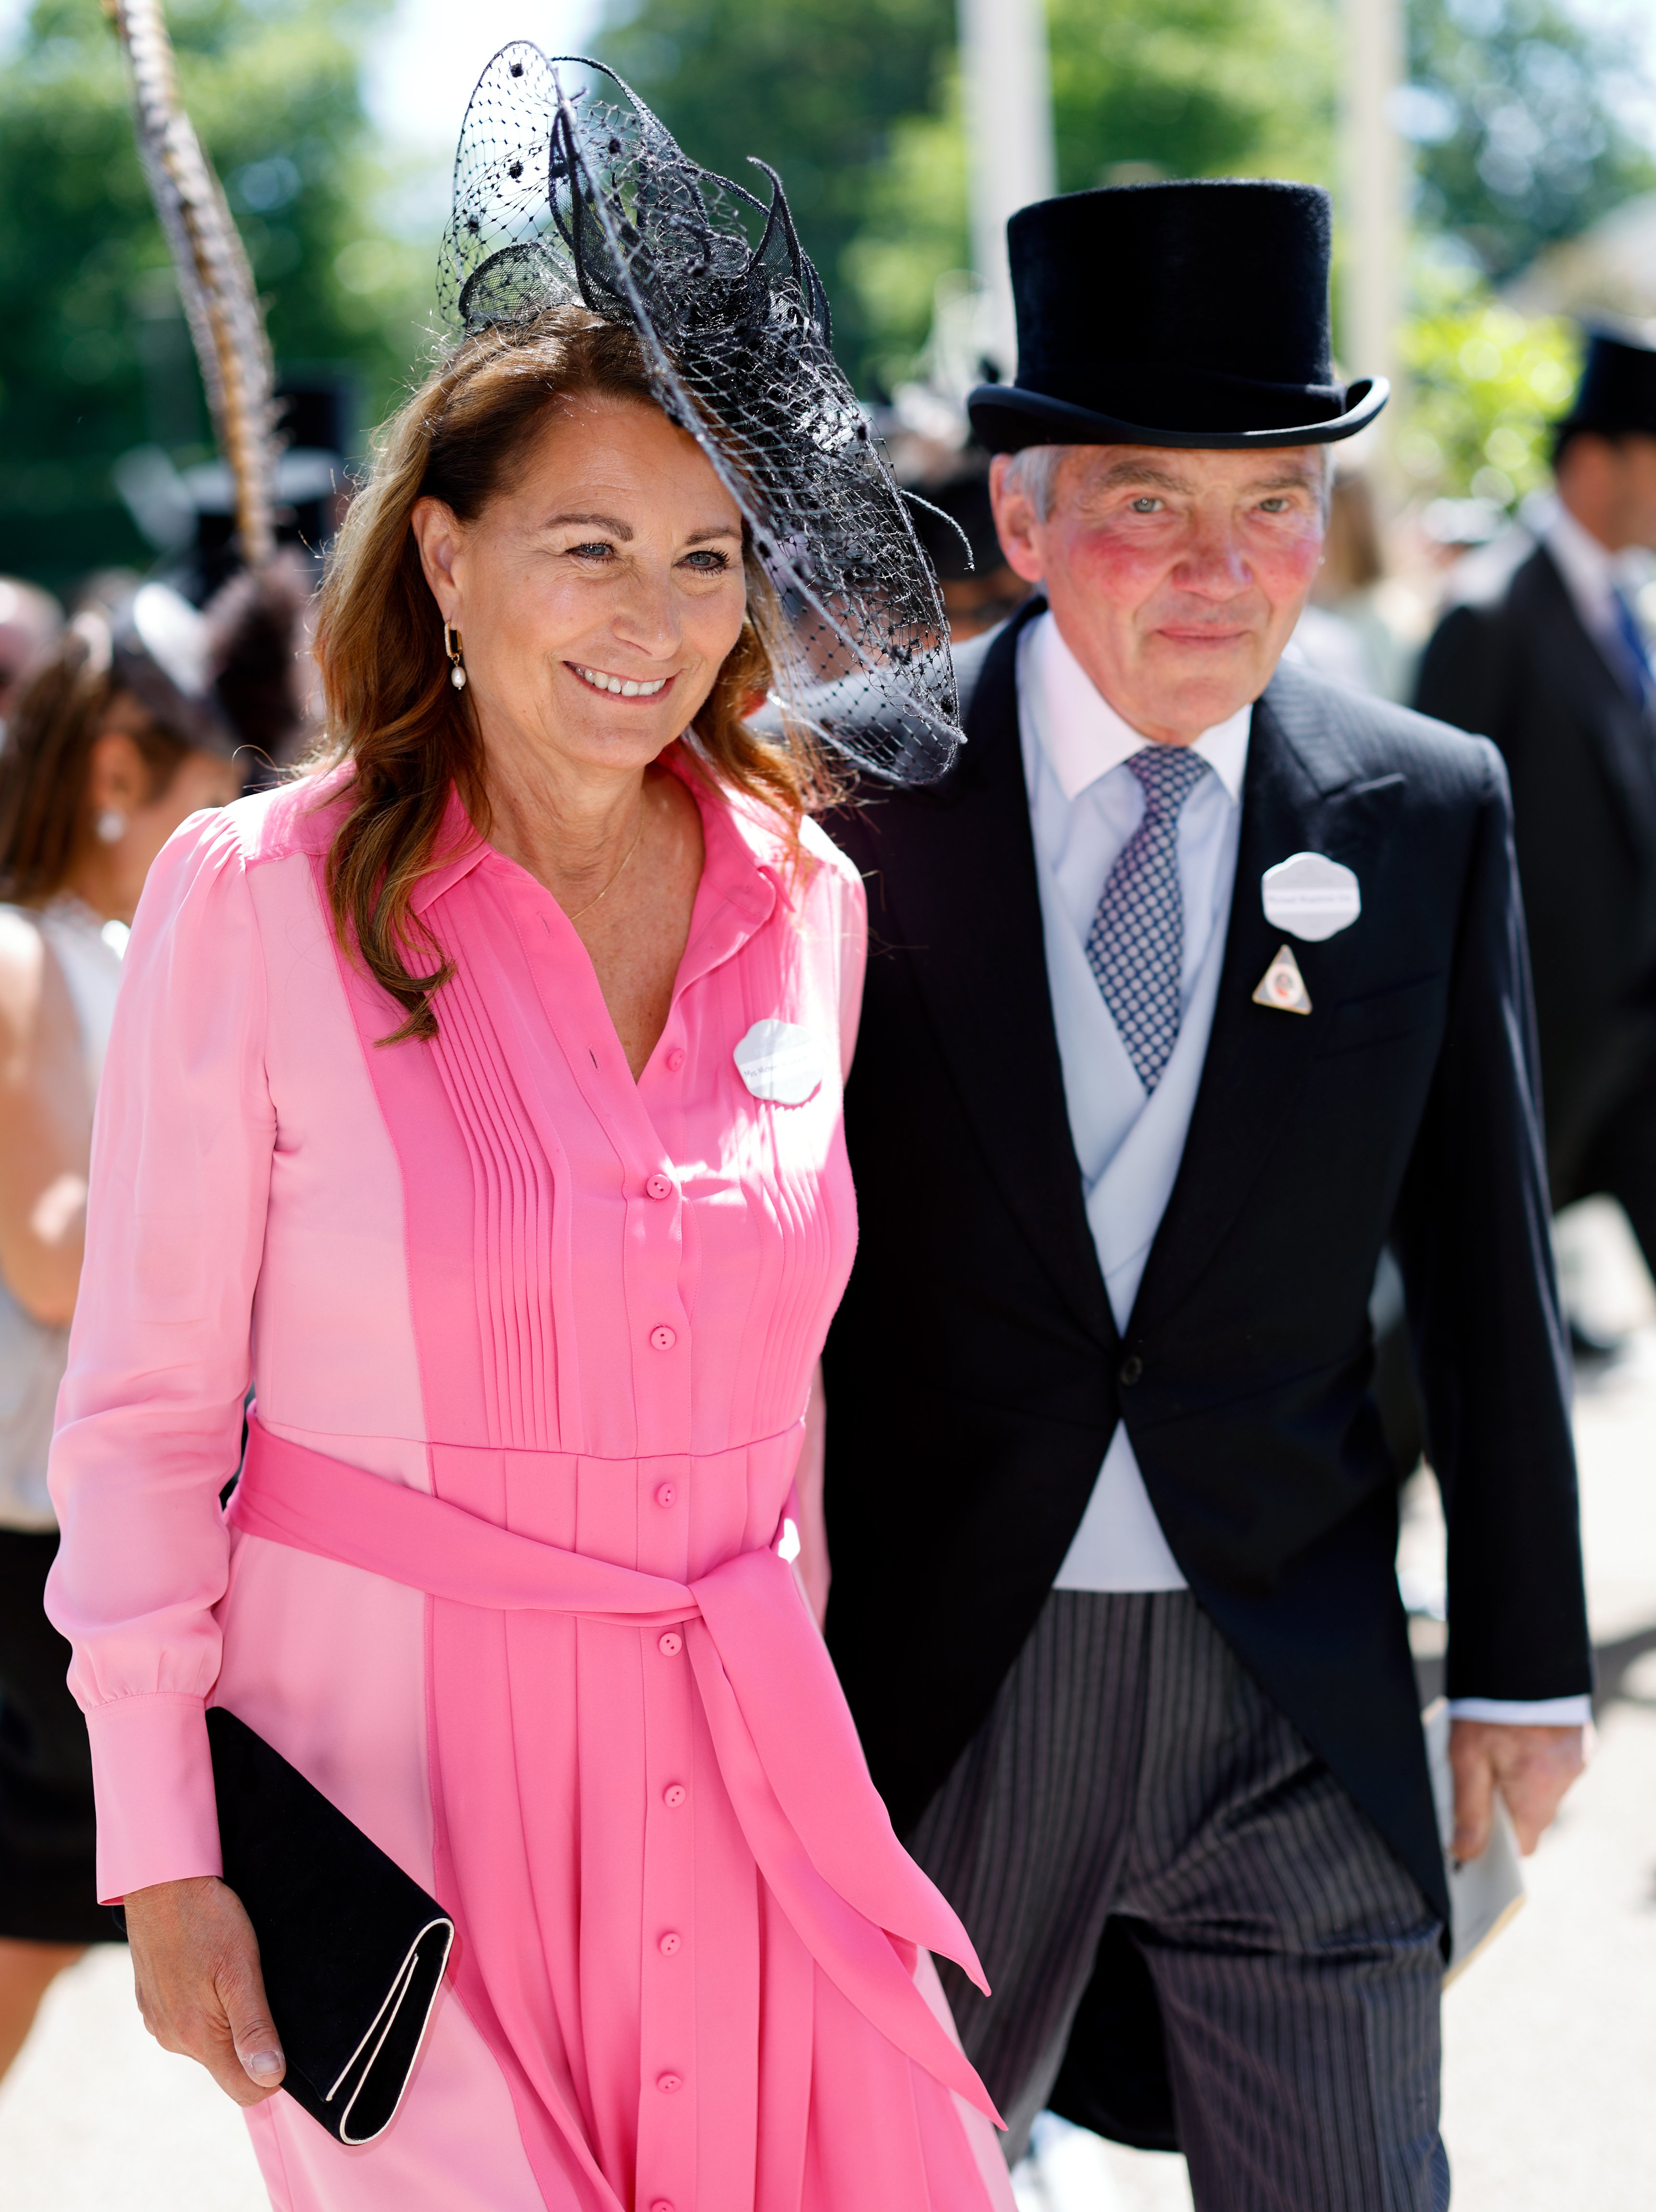 Carole Middleton and Michael Middleton attending day 1 of Royal Ascot at Ascot Racecourse on June 14, 2022 in Ascot, England. / Source: Getty Images